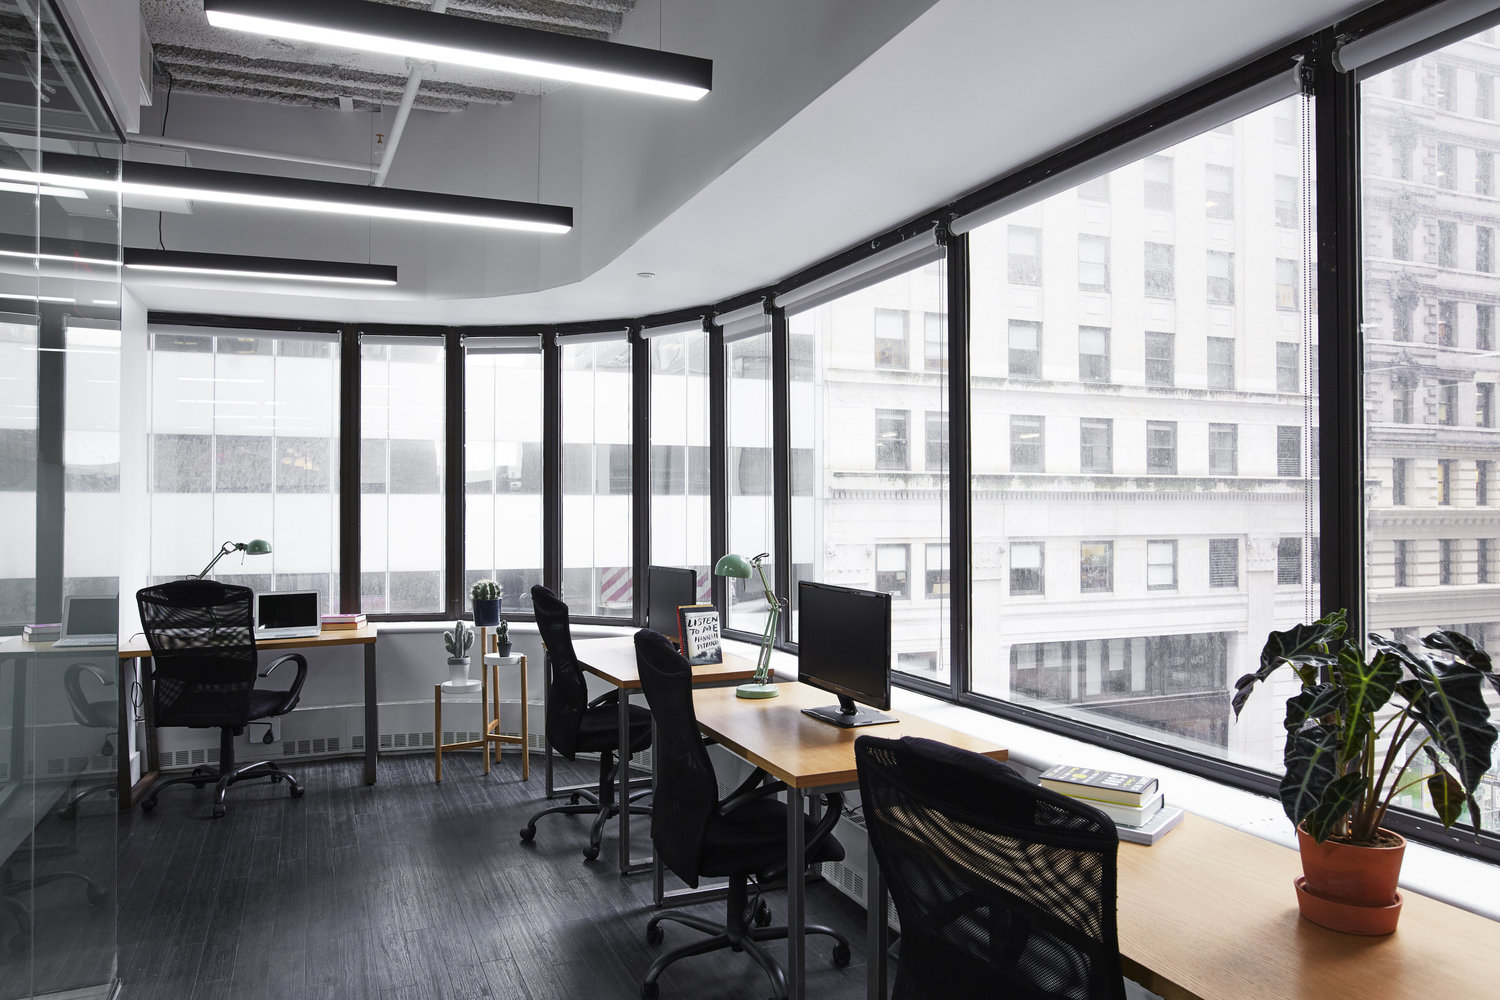 Interior of a startup office space with wooden desks and black chairs